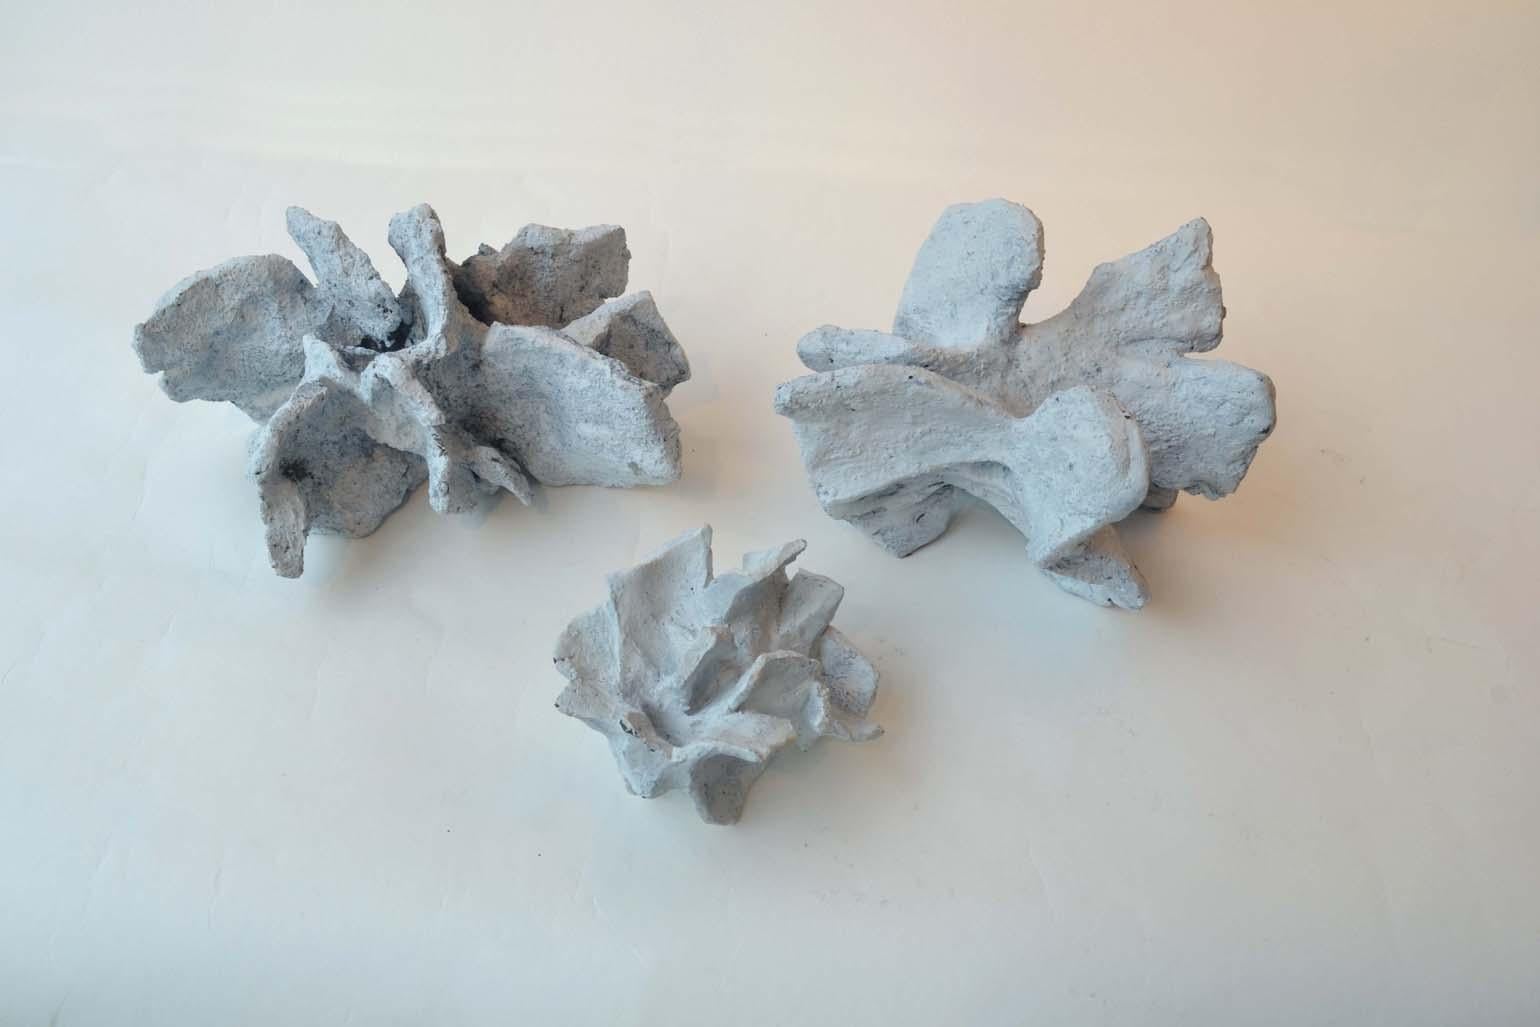 These hand formed ceramic sculptures resemble white cliffs on the British coast line. They are hand-sculpted ceramic, chalk-white washed after firing.
Blow's work echoes a voyage of discovery in not just the visible natural world of trees, rocks